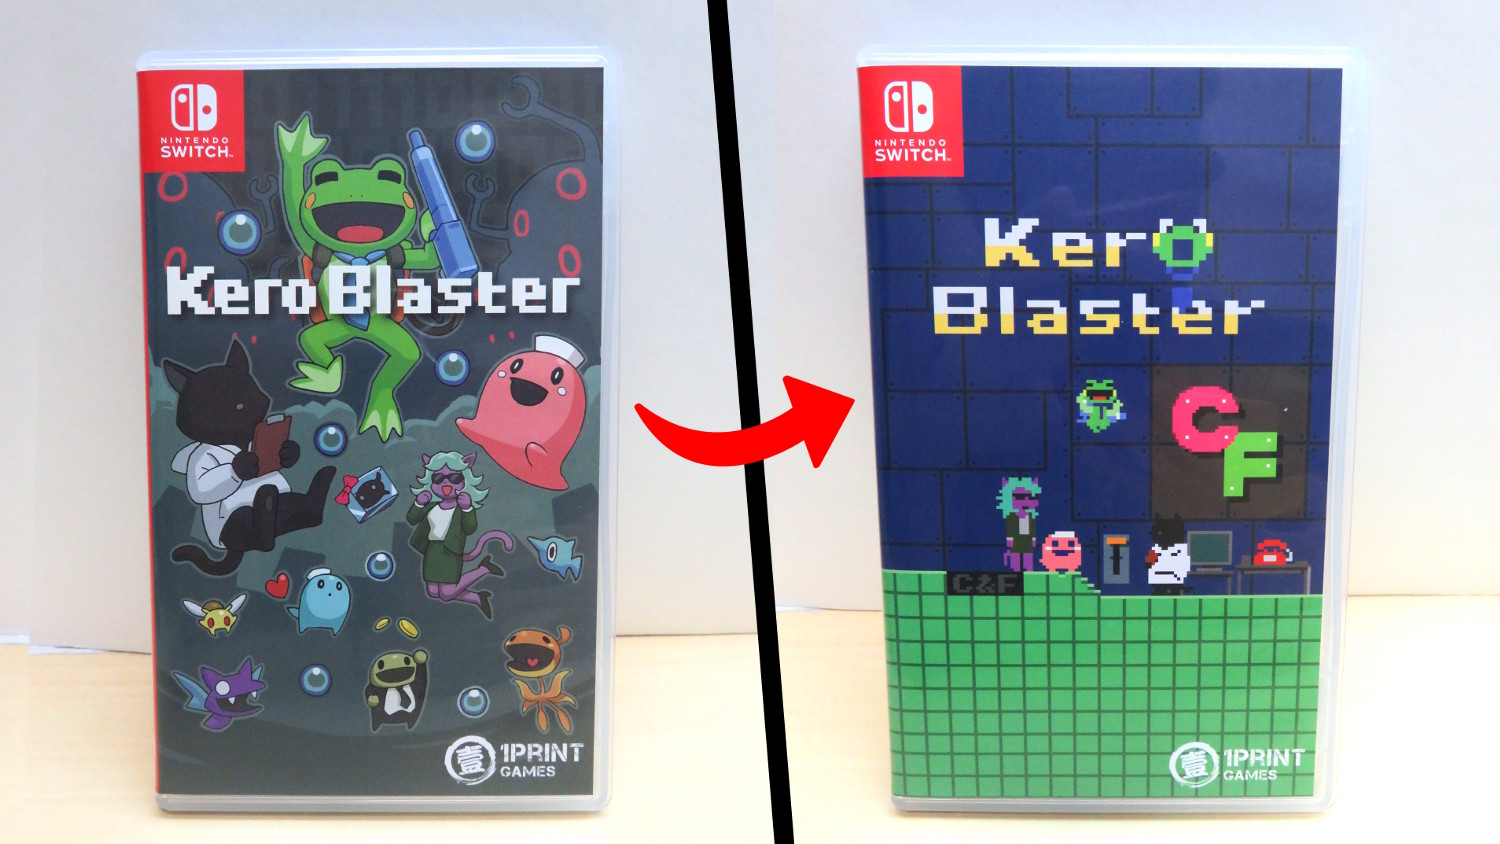 Check out the reversible cover for 1Print Games' Kero Blaster